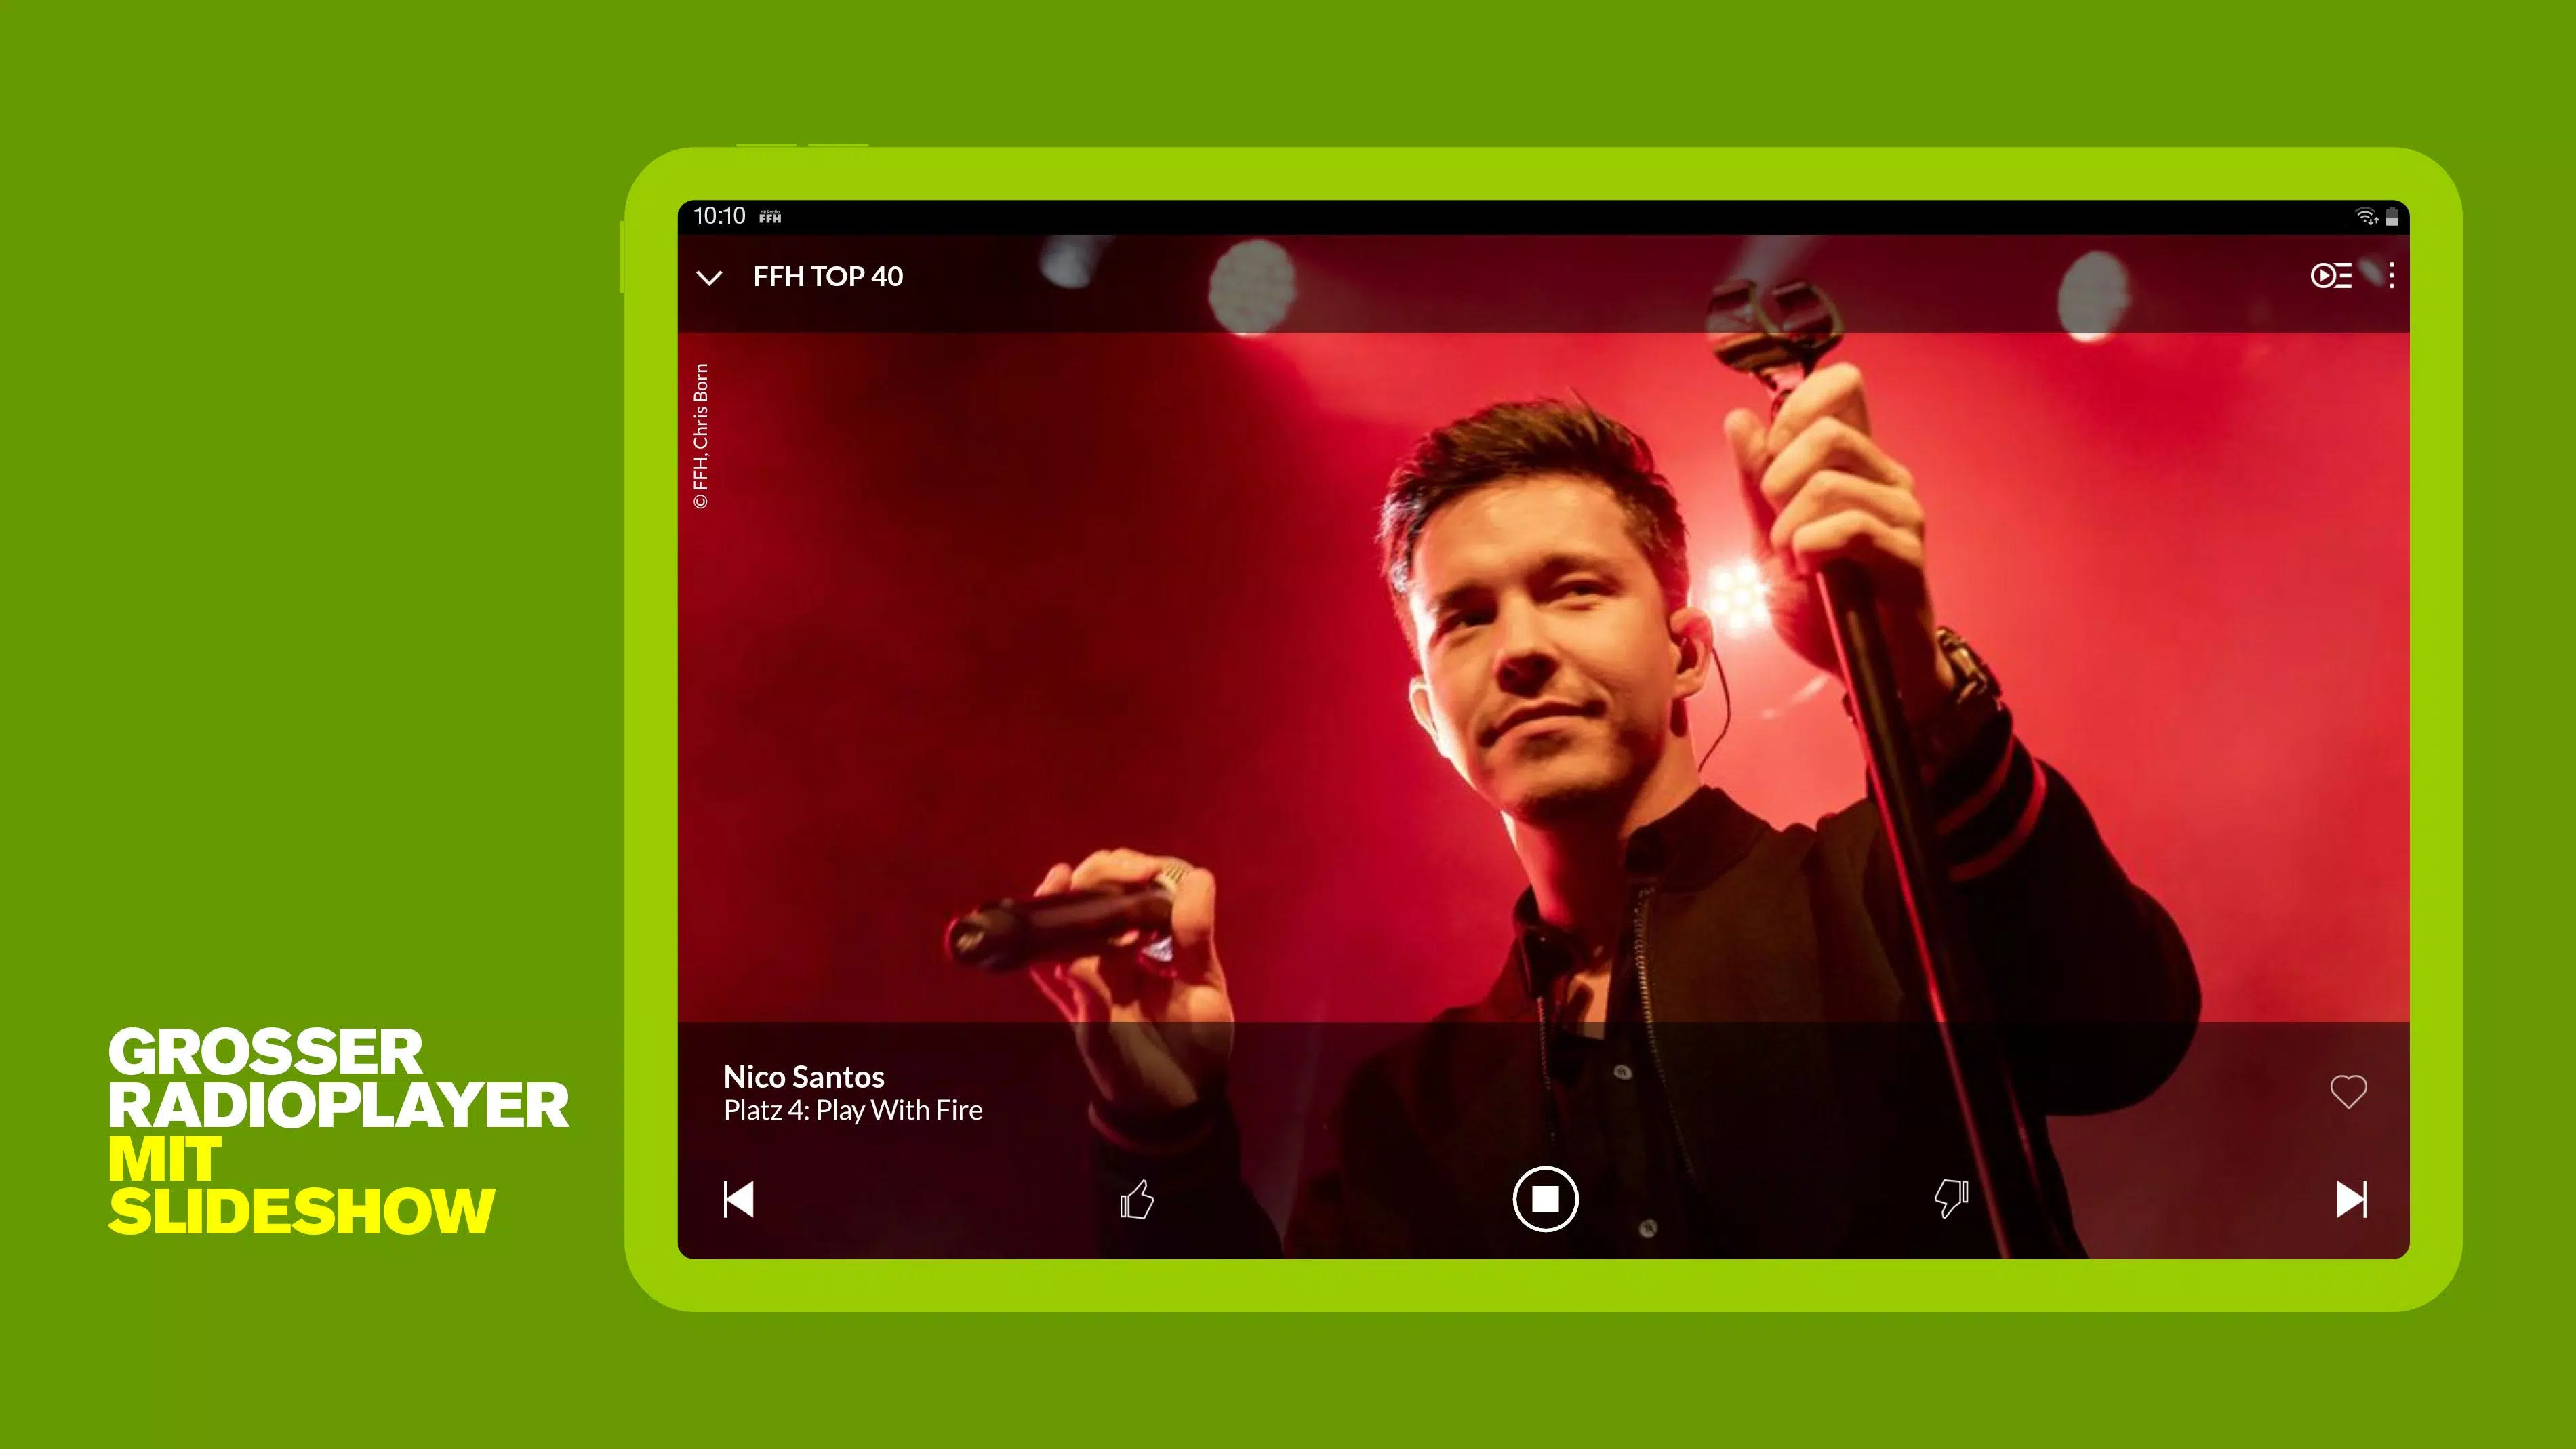 HIT RADIO FFH for Android - APK Download